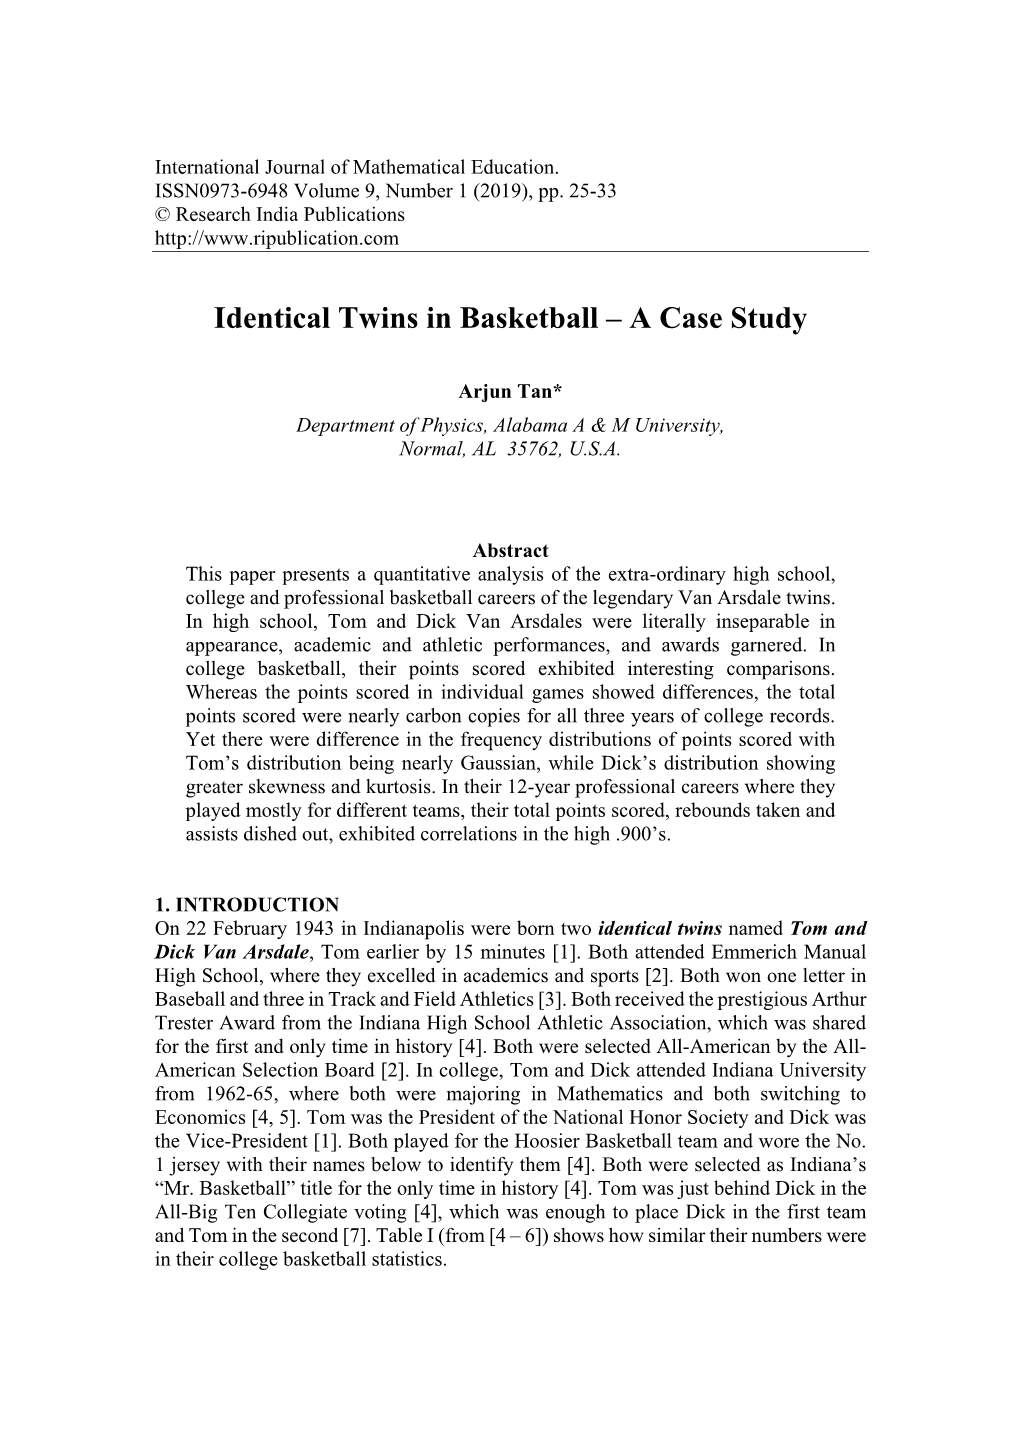 Identical Twins in Basketball – a Case Study